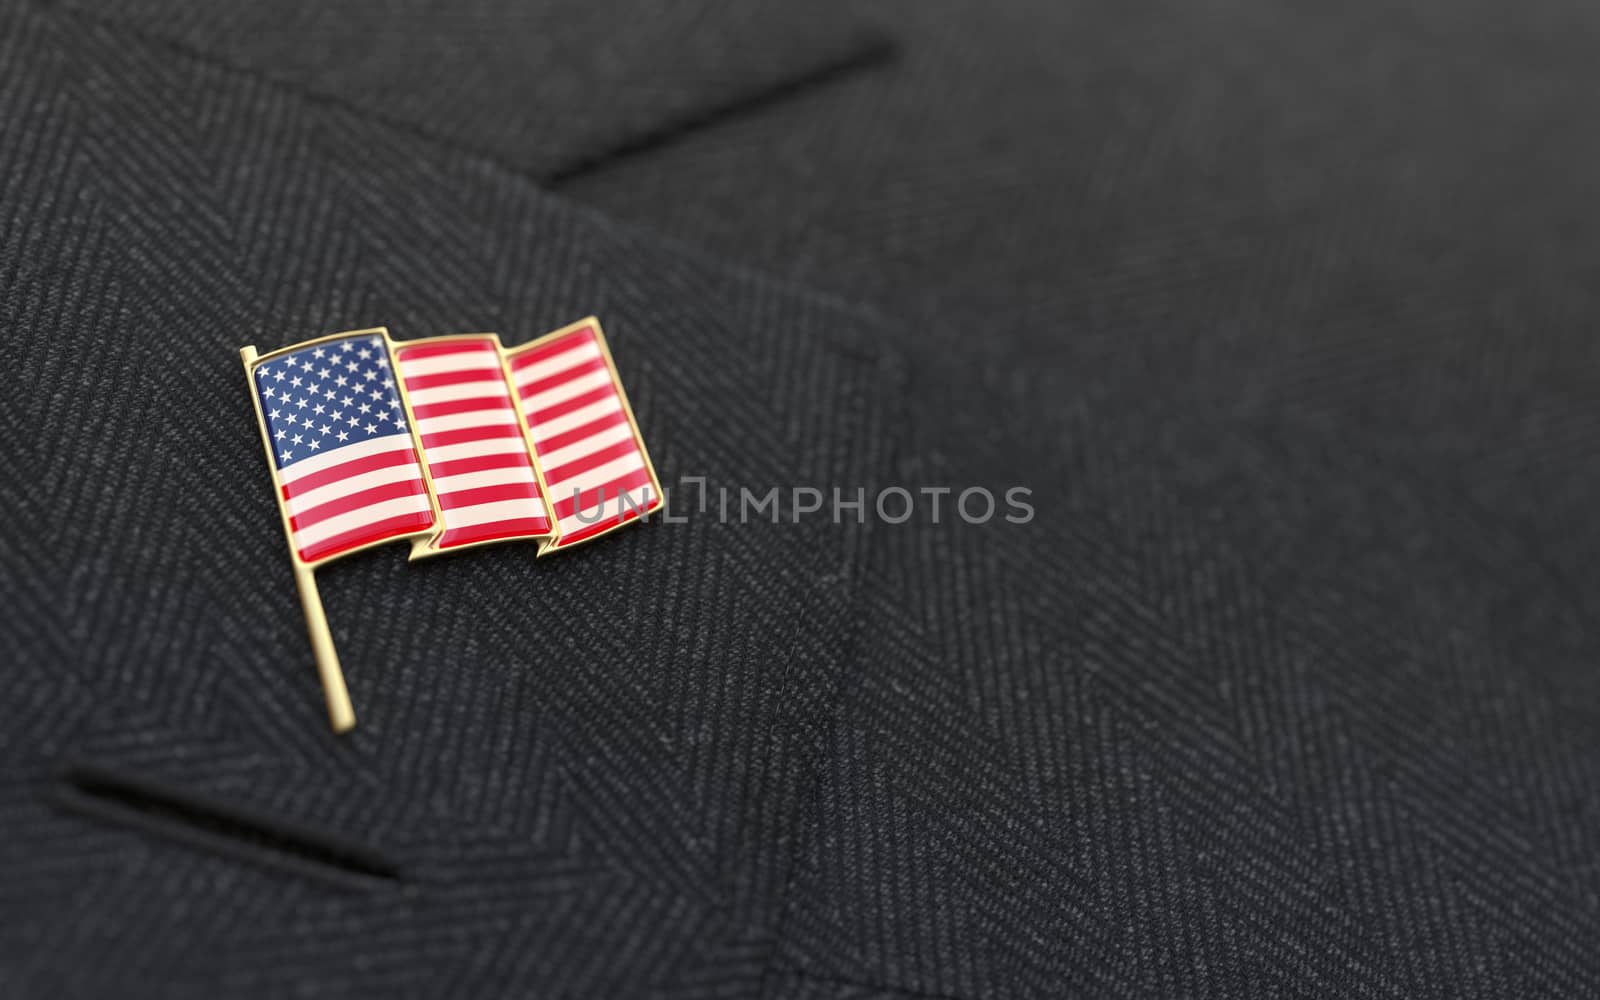 USA flag lapel pin on the collar of a business suit jacket shows patriotism